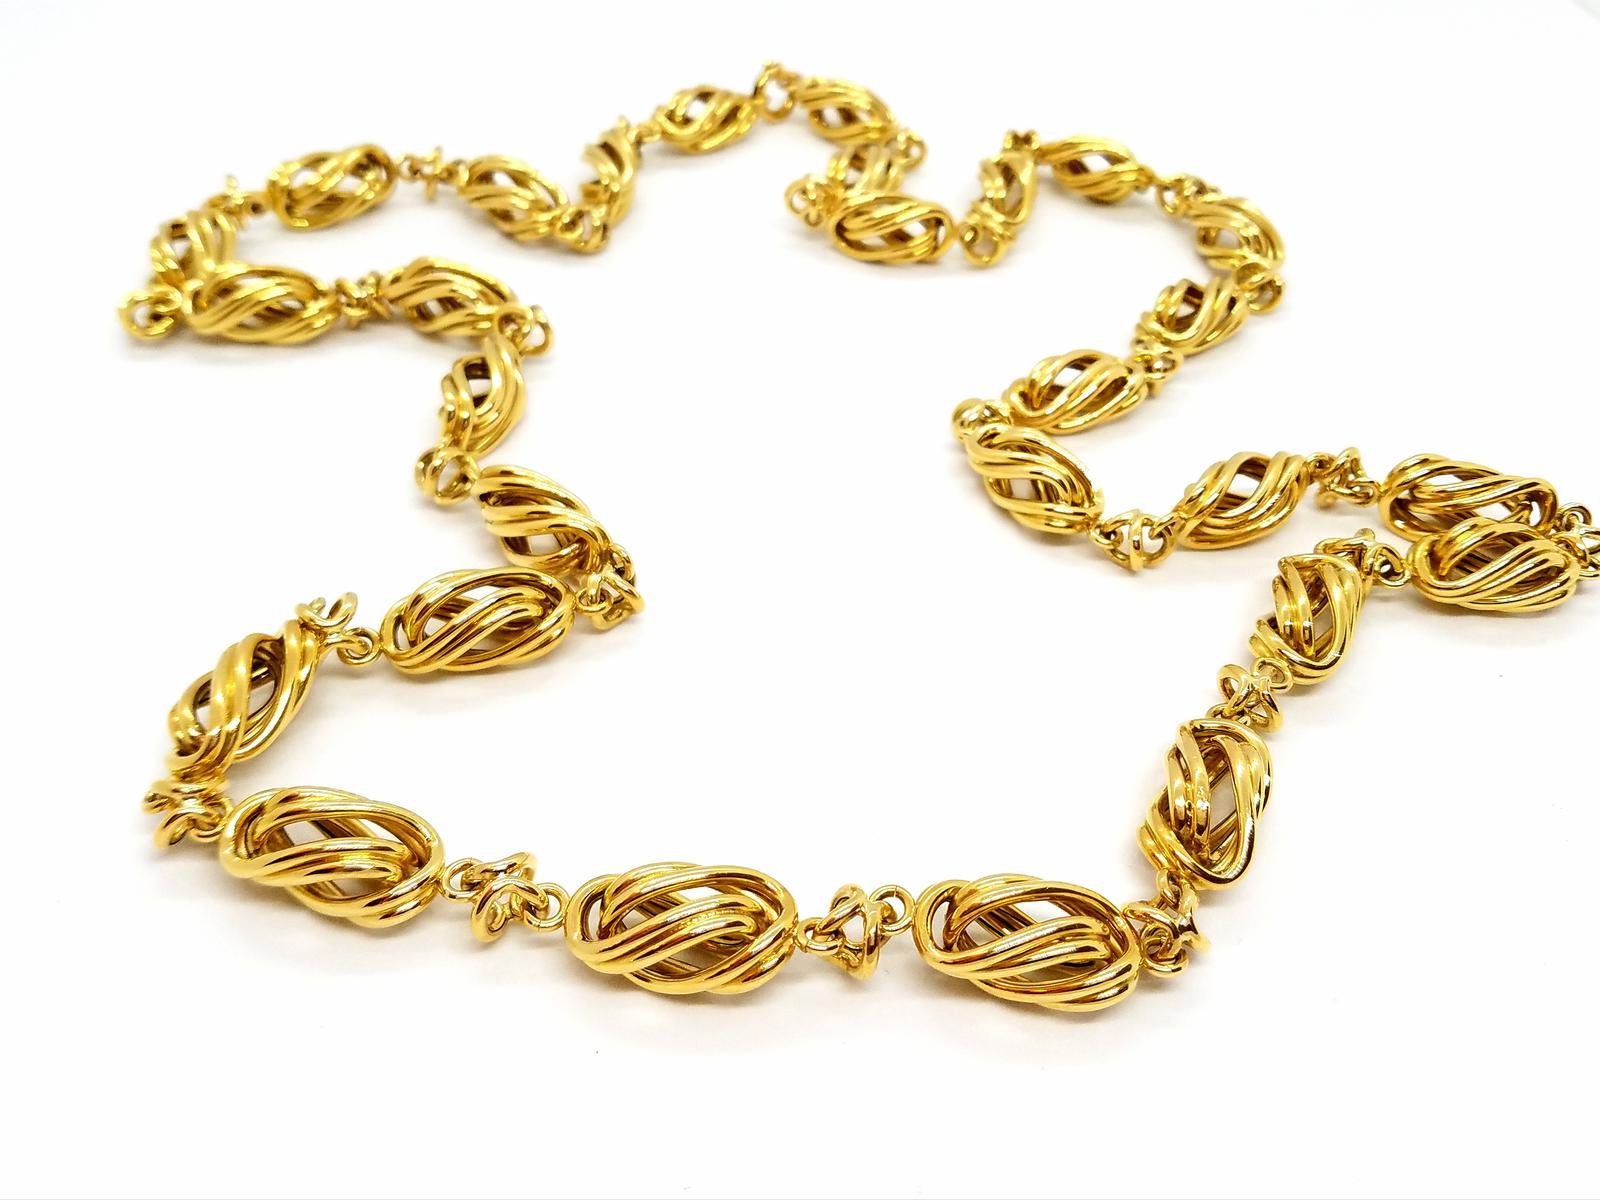 Beautiful gold necklace yellow 750 mils (18 carats). jumper length 102 cm. width: 1.16 cm. can be worn over one or two turns. total weight: 108.68 g. punched. excellent condition
